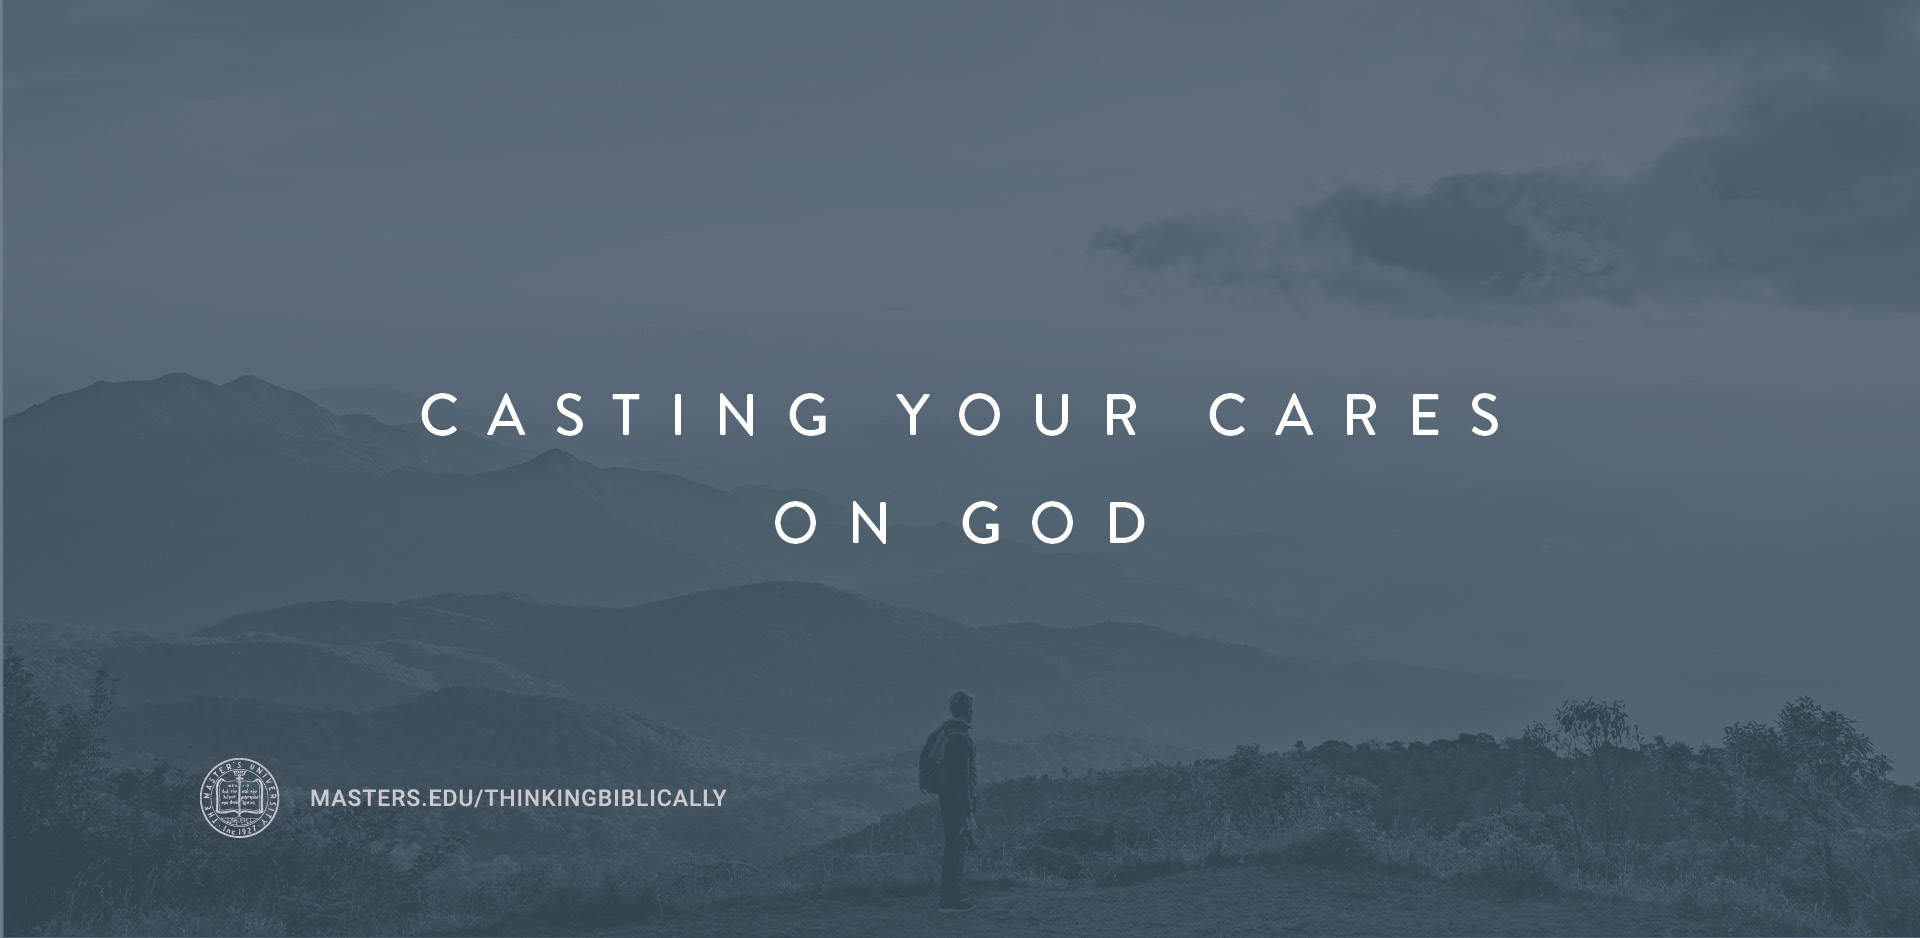 Casting Your Cares on God Featured Image